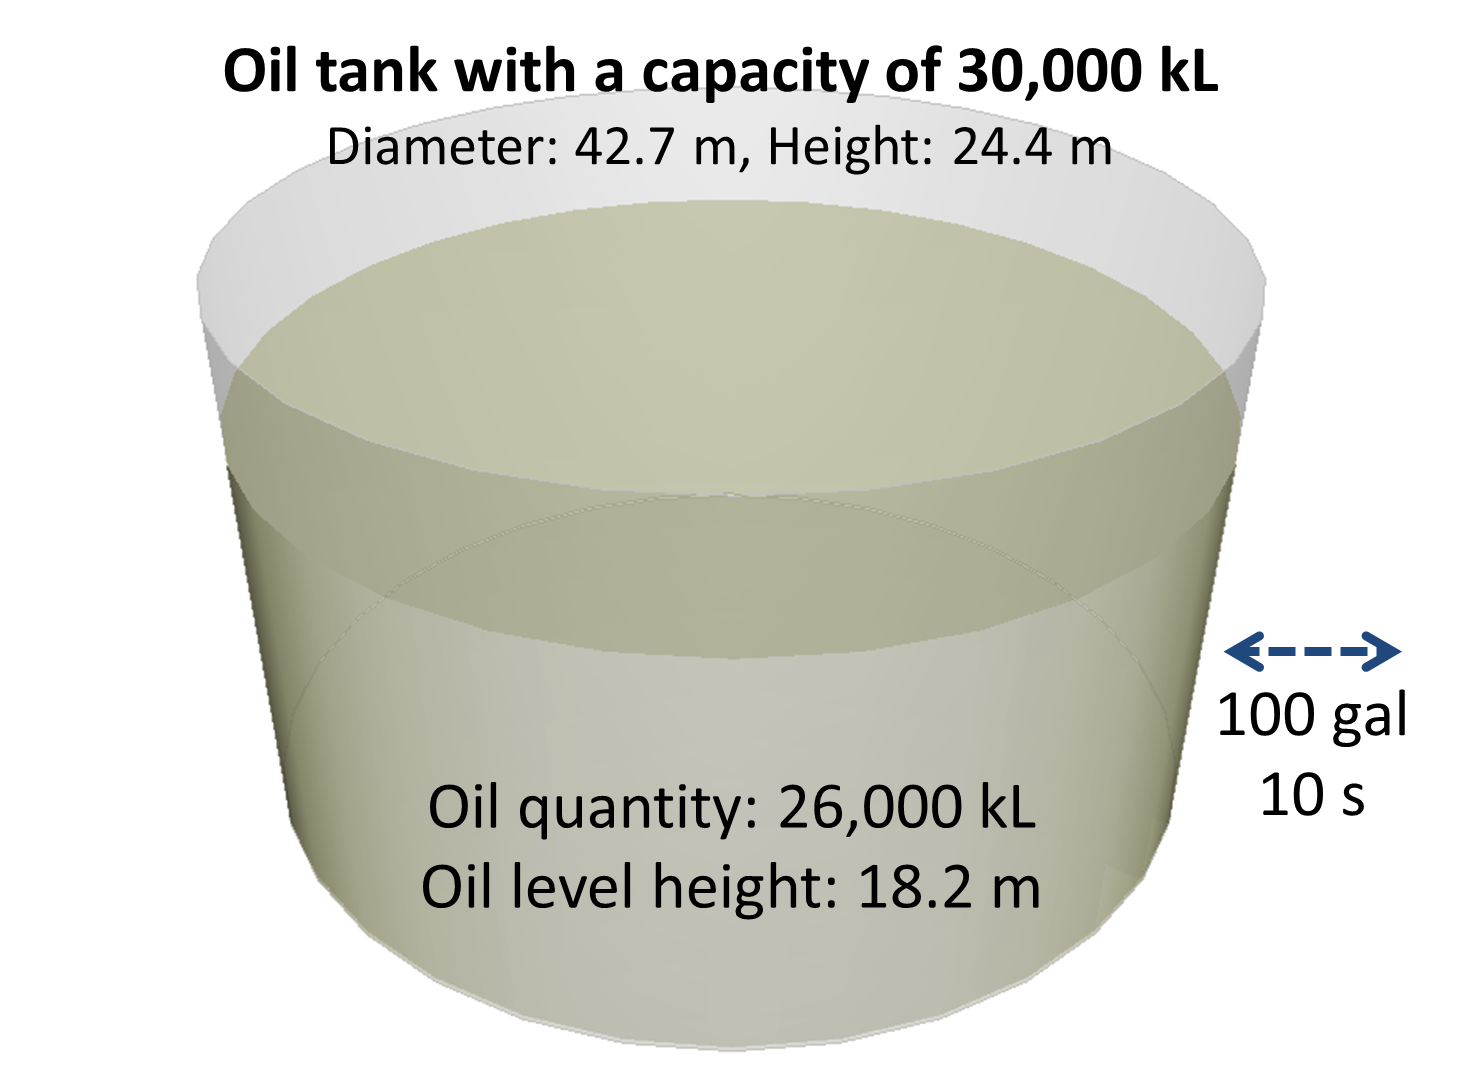 Figure 1: Oil tank with a capacity of 30,000 k